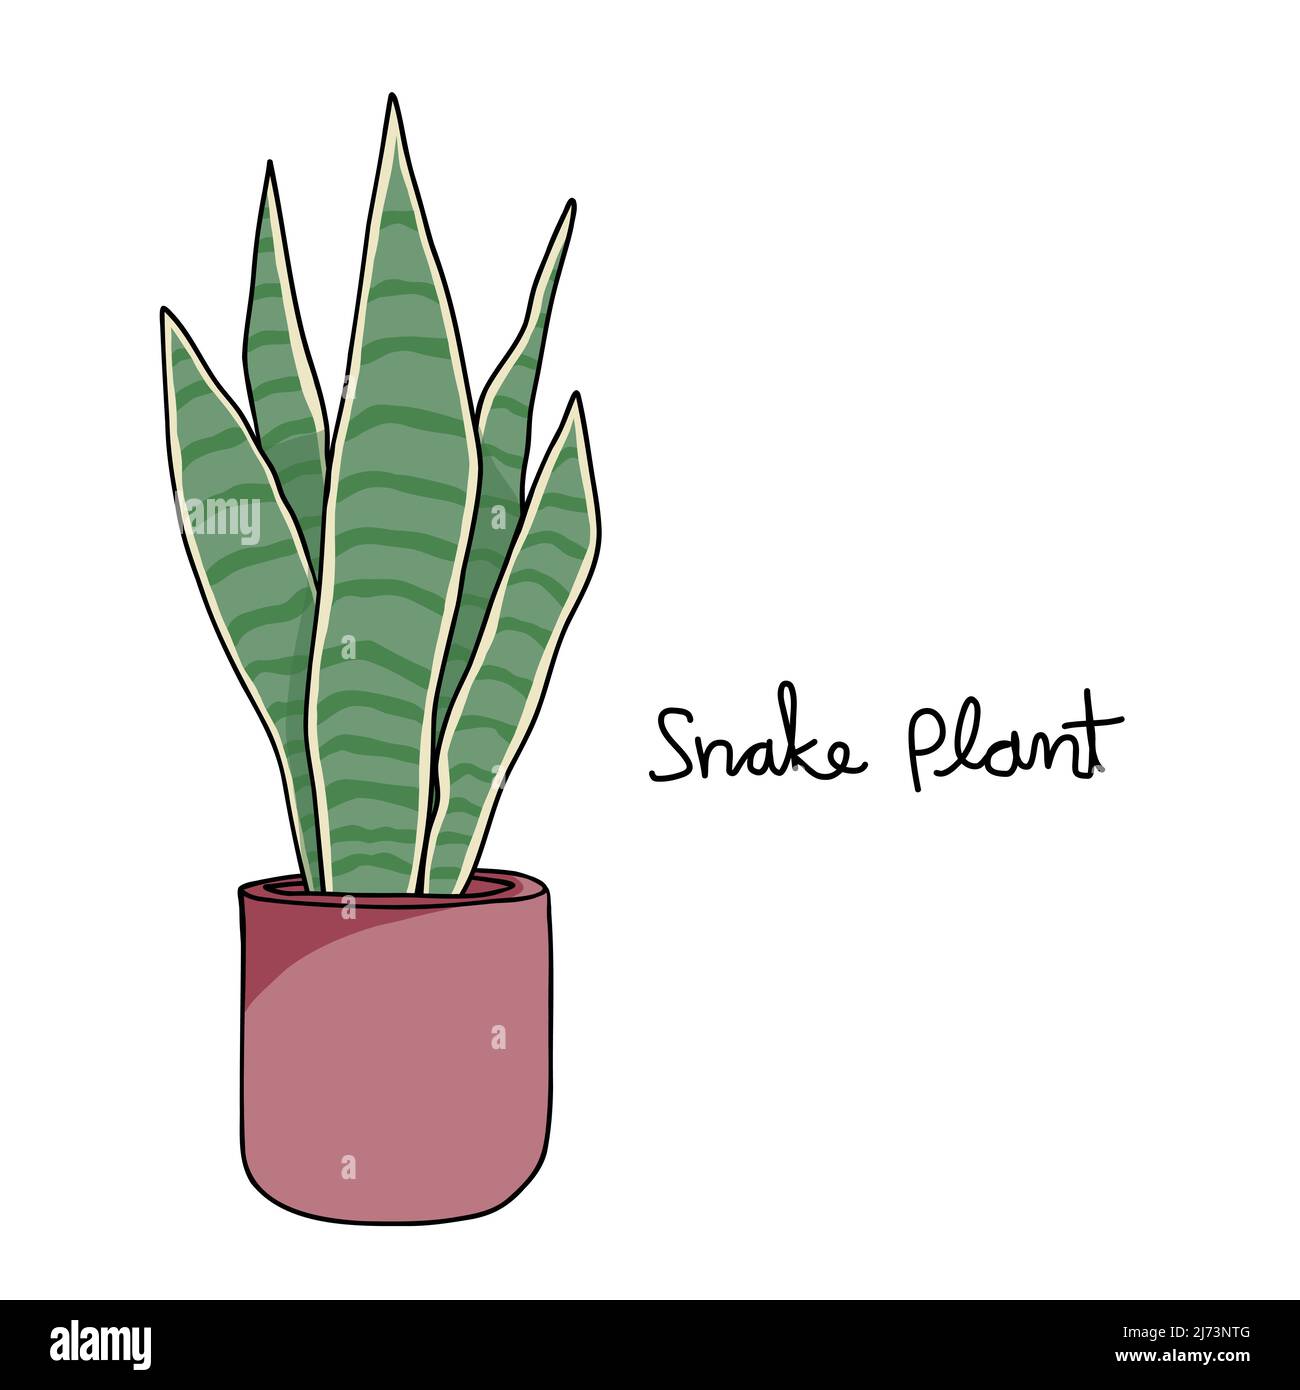 Snake Plant Isolated Cliparts, Stock Vector and Royalty Free Snake Plant  Isolated Illustrations